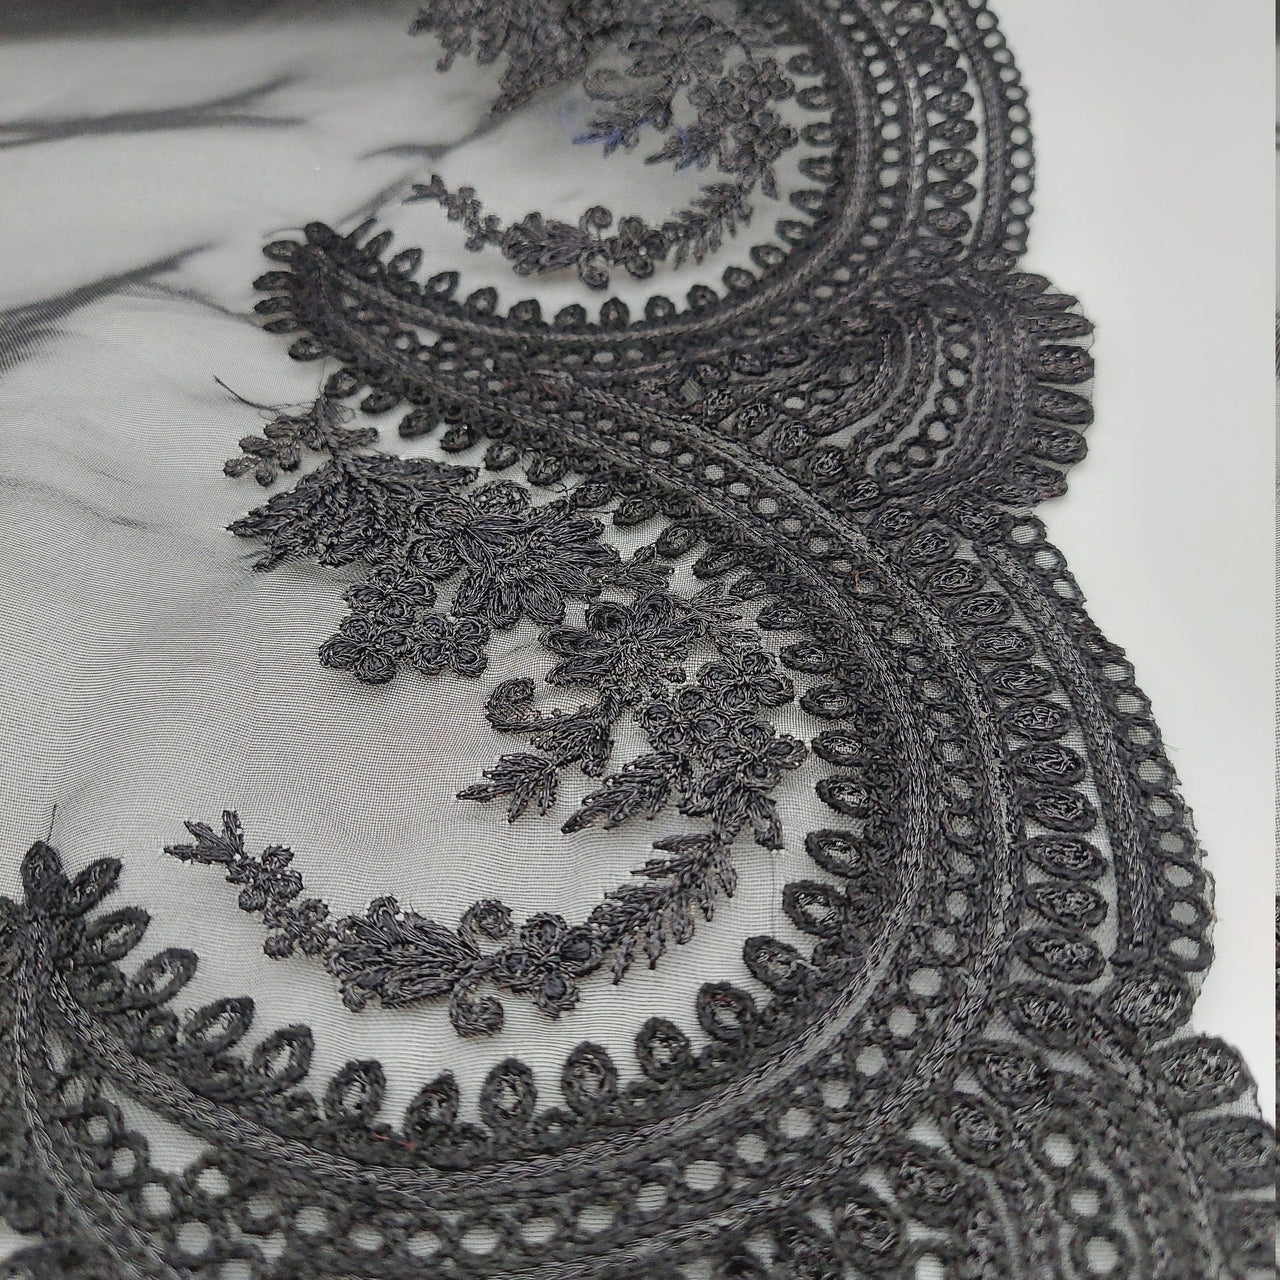 Black Organza Fabric Scalloped Cutwork Lace Trim with Floral Embroidery, Sari Border, Embroidered Trim